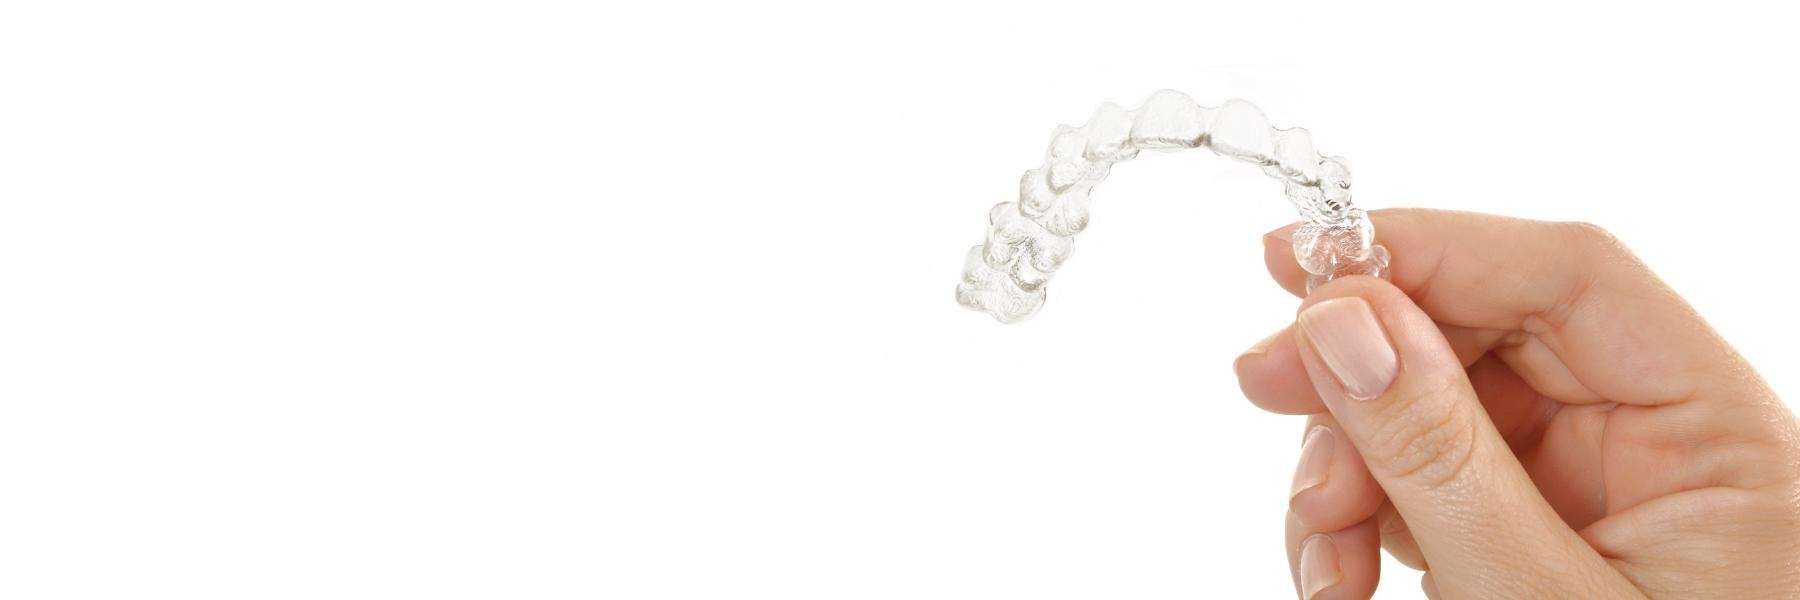 Clear Braces vs. Traditional: Making the Right Choice